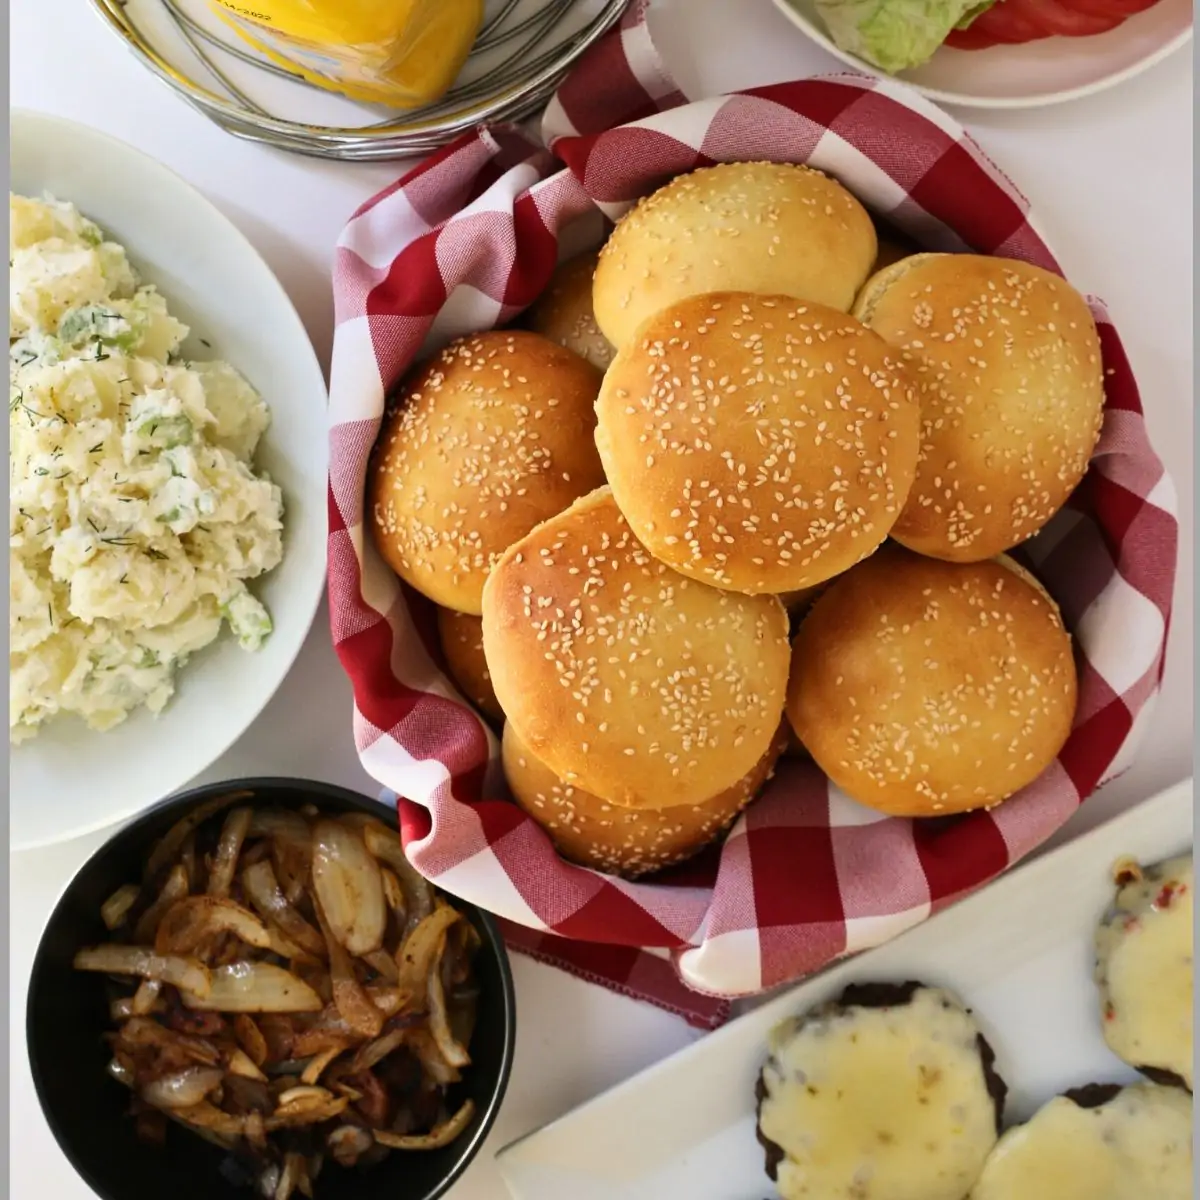 a basket of hamburger buns next to a platter of burgers and toppings.